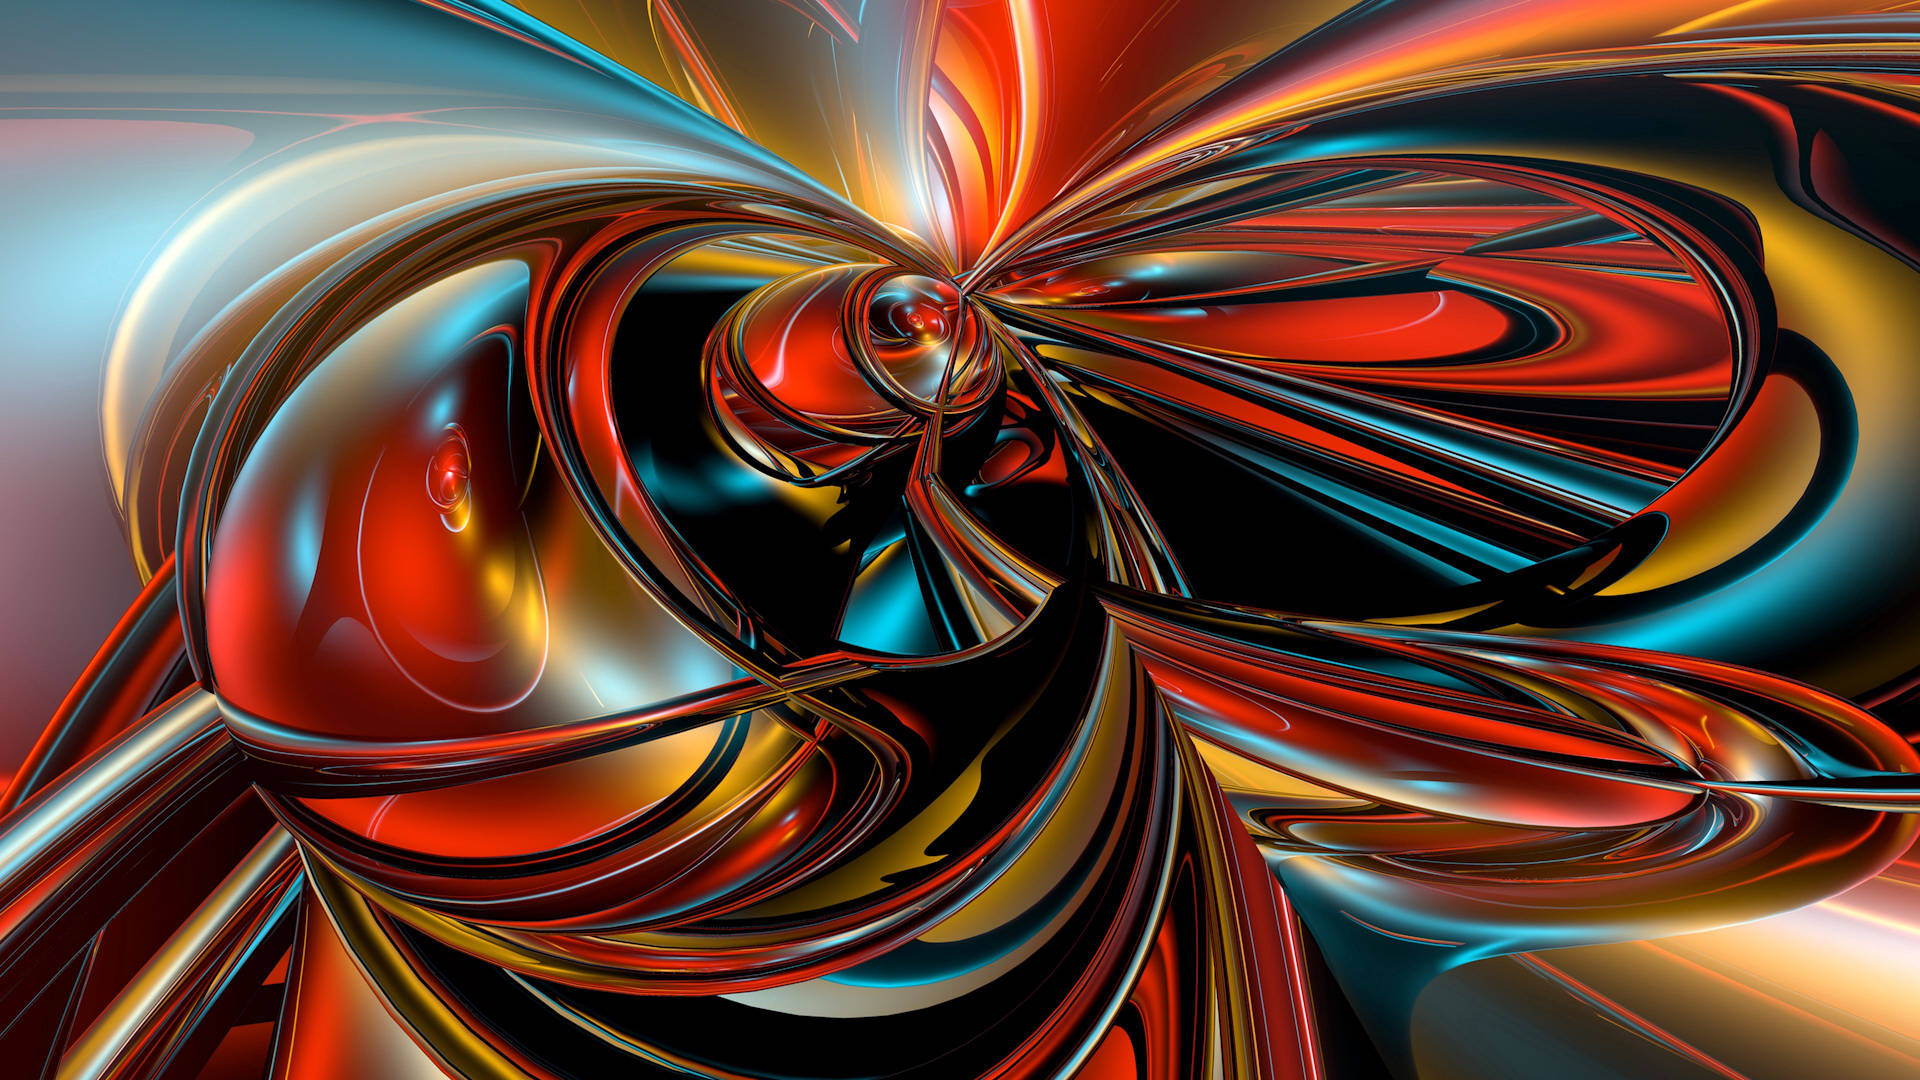 3d Colorful Fractal Abstract Artwork